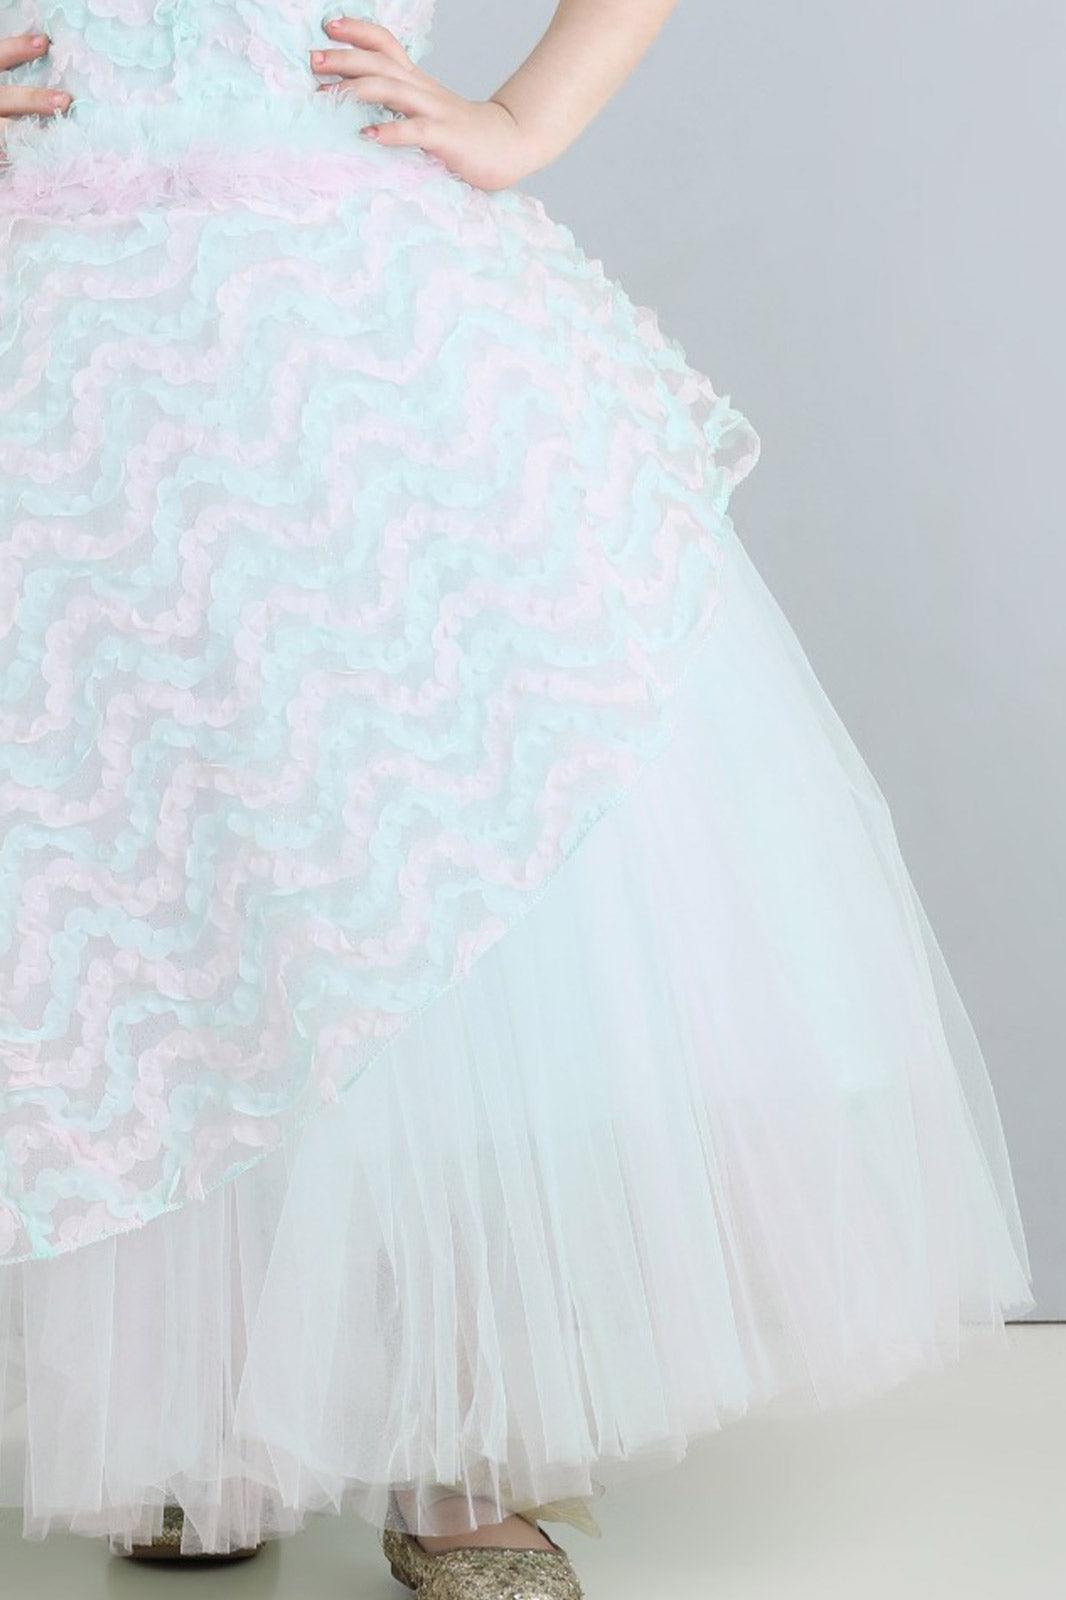 Dreamy Pastels: Light Blue and Baby Pink Gown for Girls. - Lagorii Kids